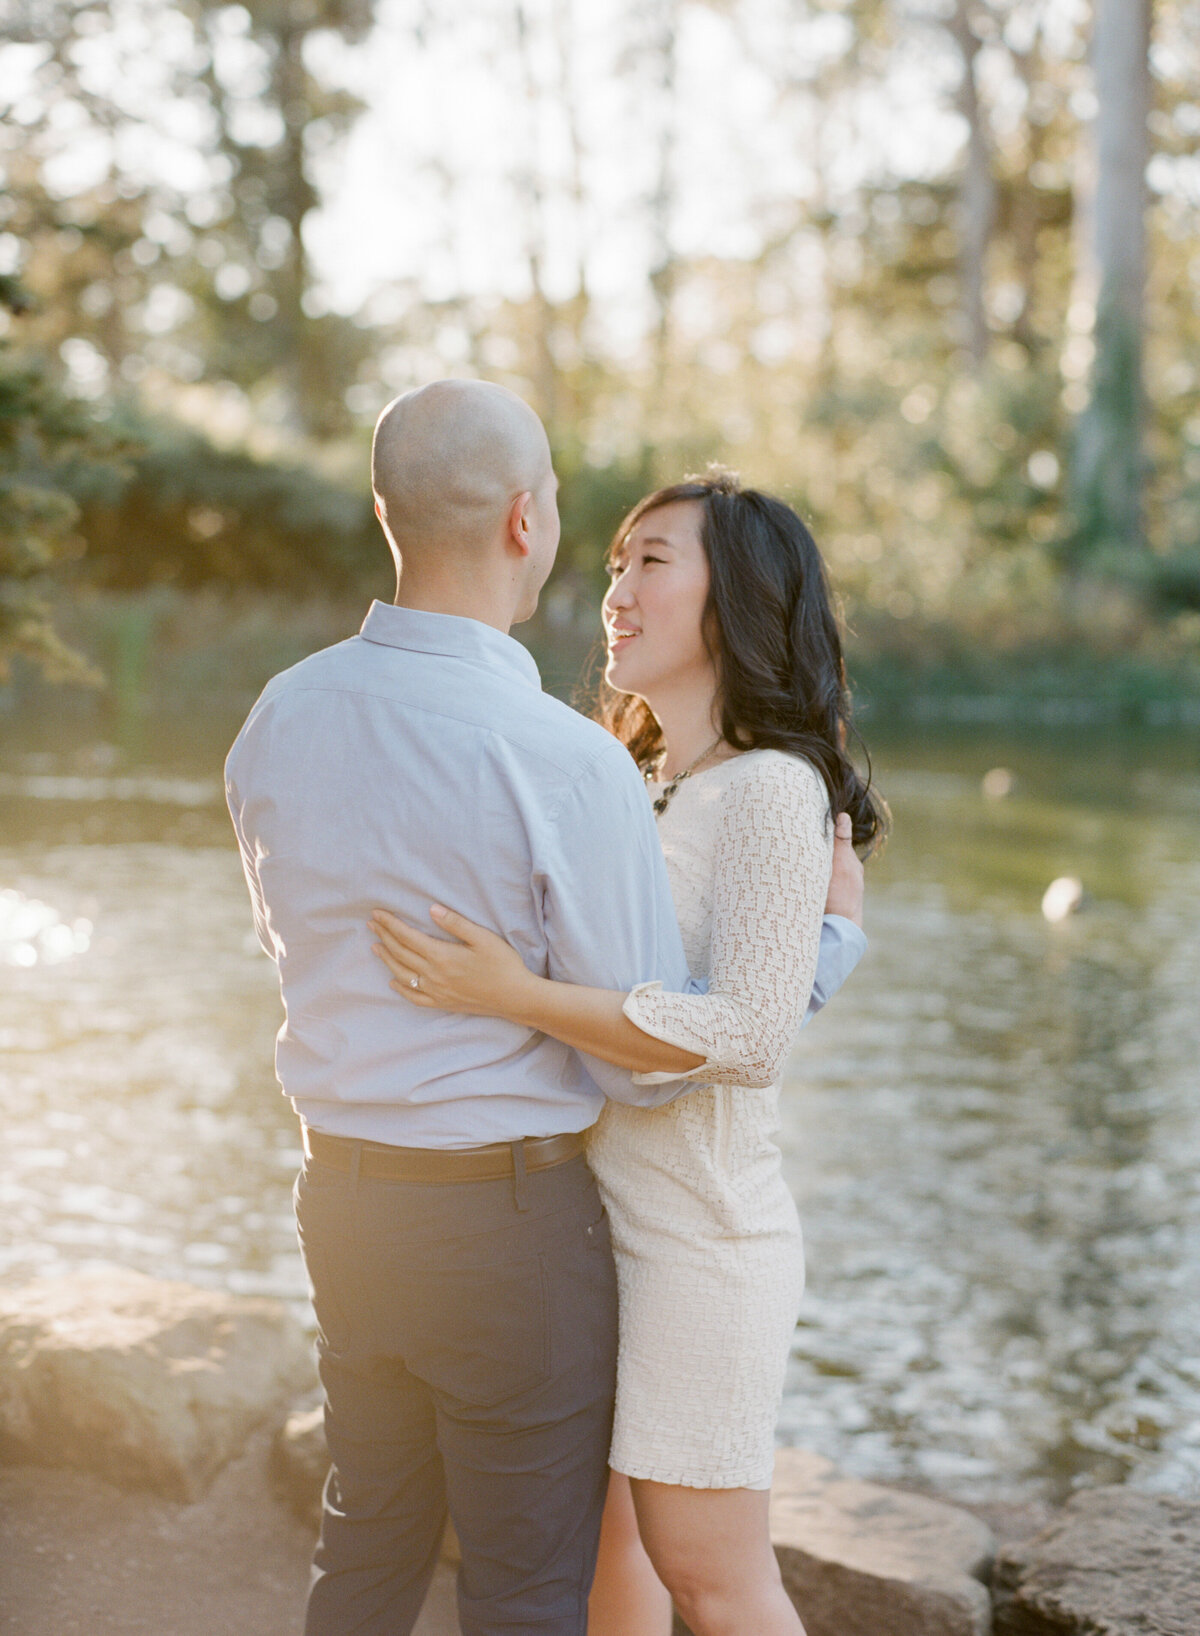 Gloria + Billy San Francisco Hometown Creamery Stow Lake Golden Gate Park Alamo Square Engagement Session Cassie Valente Photography 0039